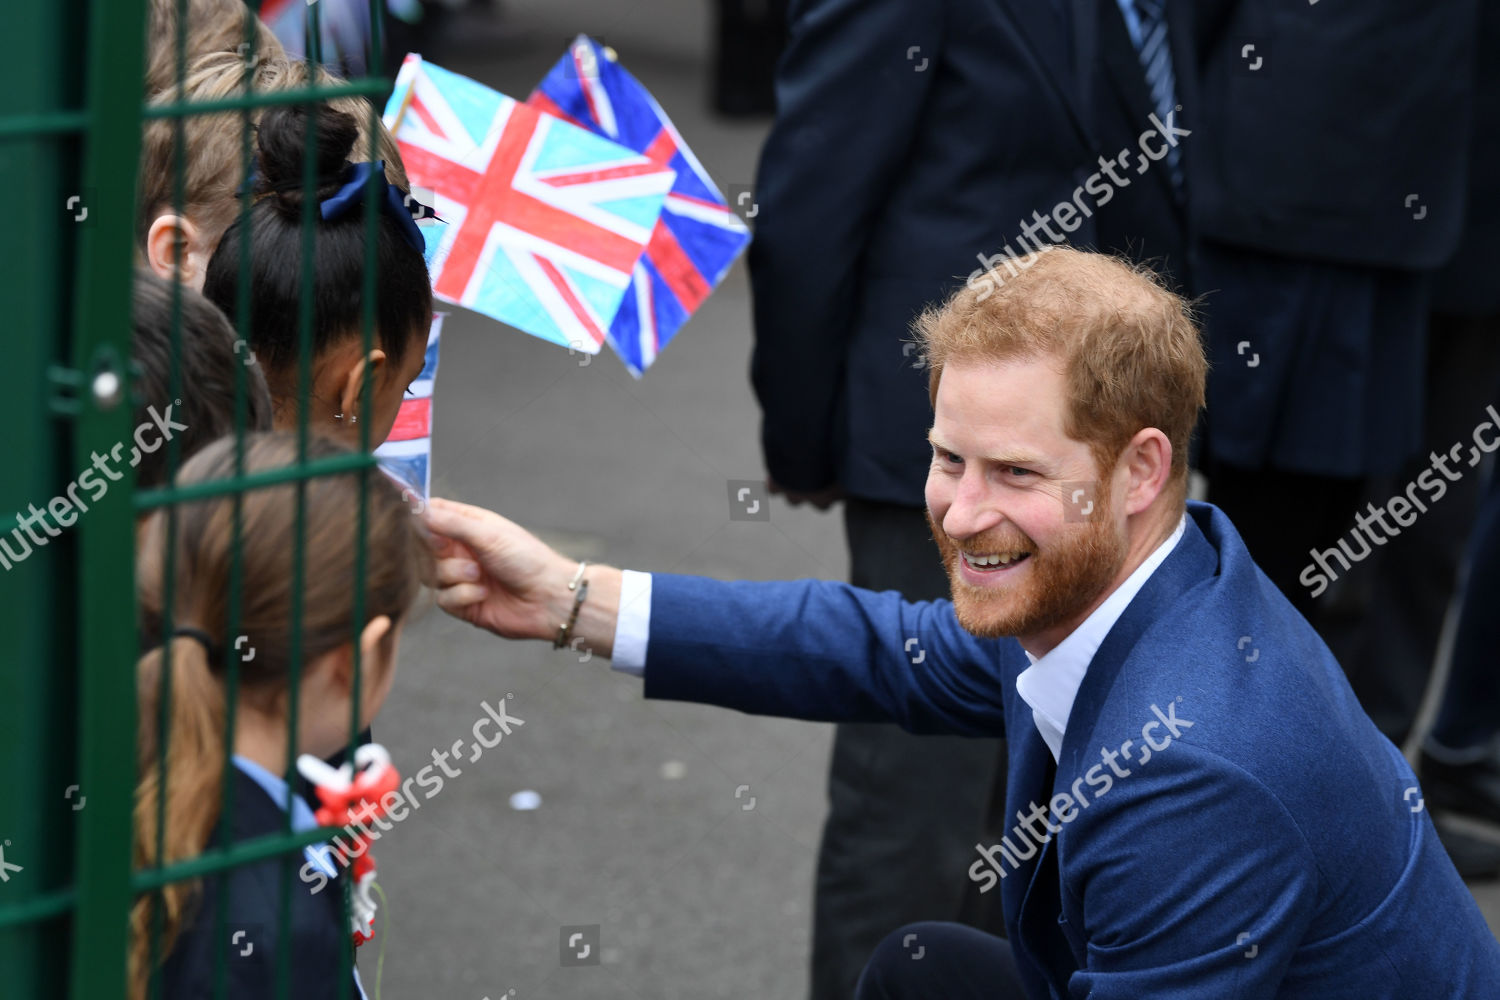 prince-harry-visits-st-vincents-catholic-primary-school-for-commonwealth-canopy-and-woodland-trust-tree-planting-ceremony-london-uk-shutterstock-editorial-10160984l.jpg